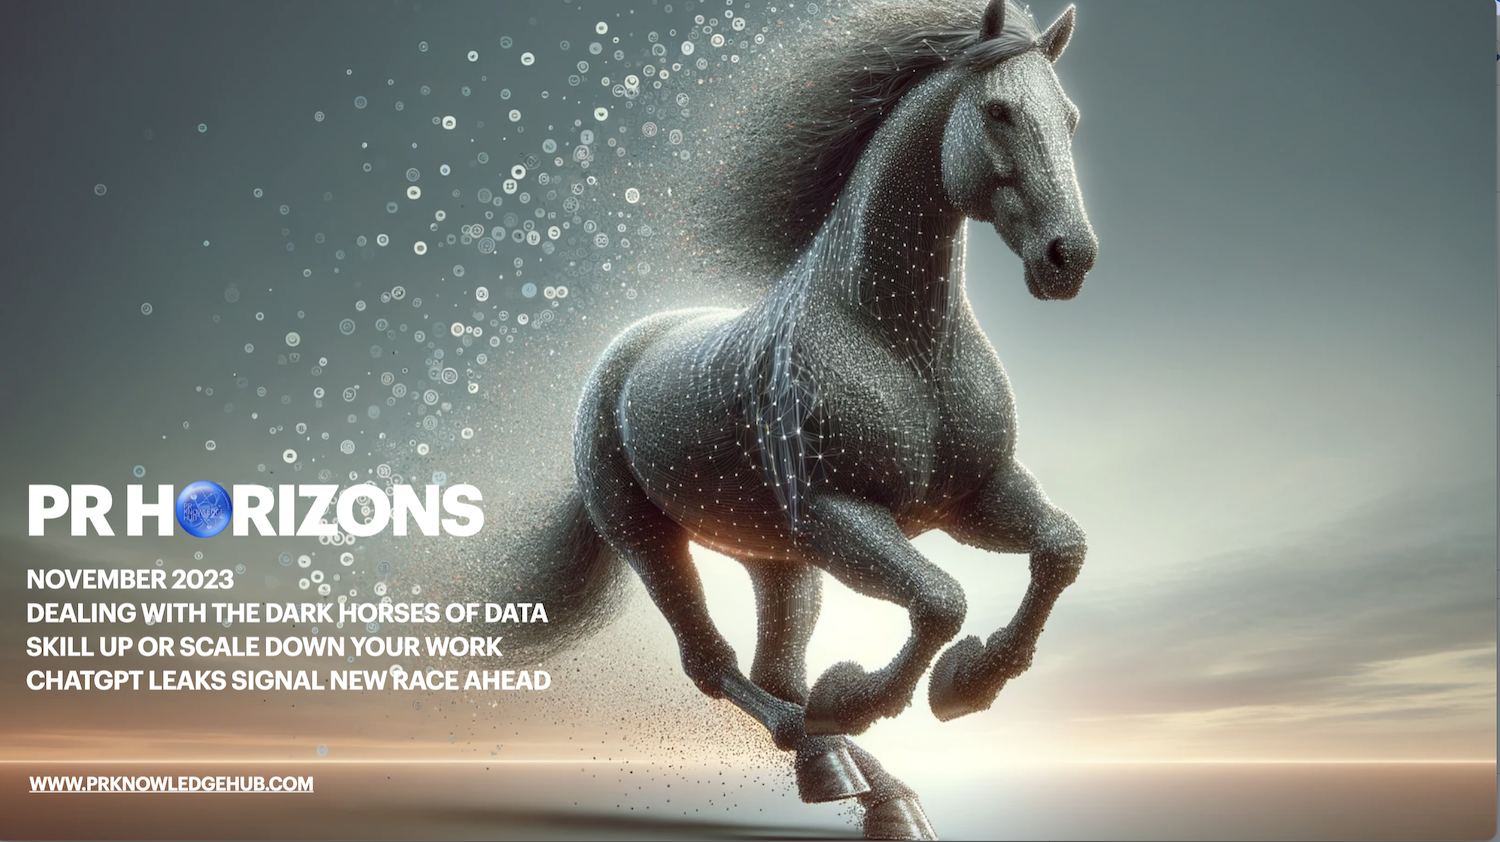 Image shows cover of PR Horizons November issue featuring a dark horse made of data